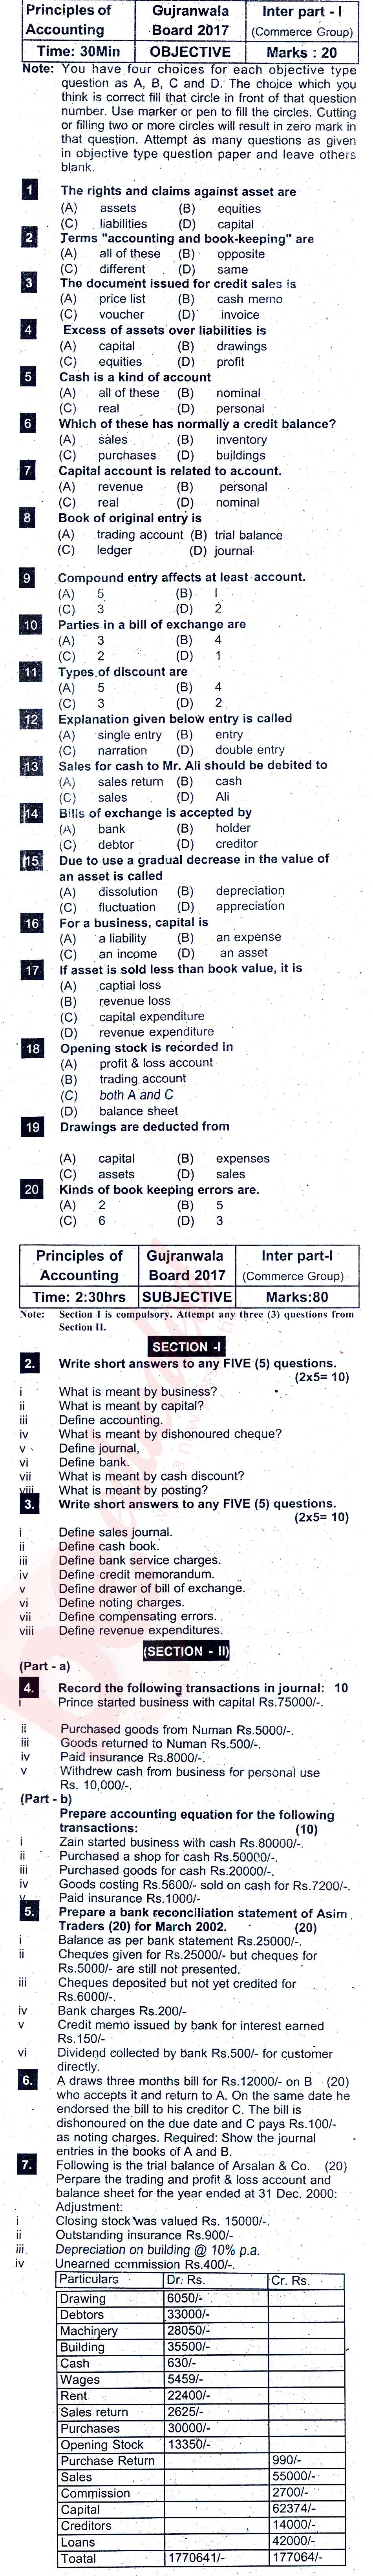 Principles of Accounting ICOM Part 1 Past Paper Group 1 BISE Gujranwala 2017